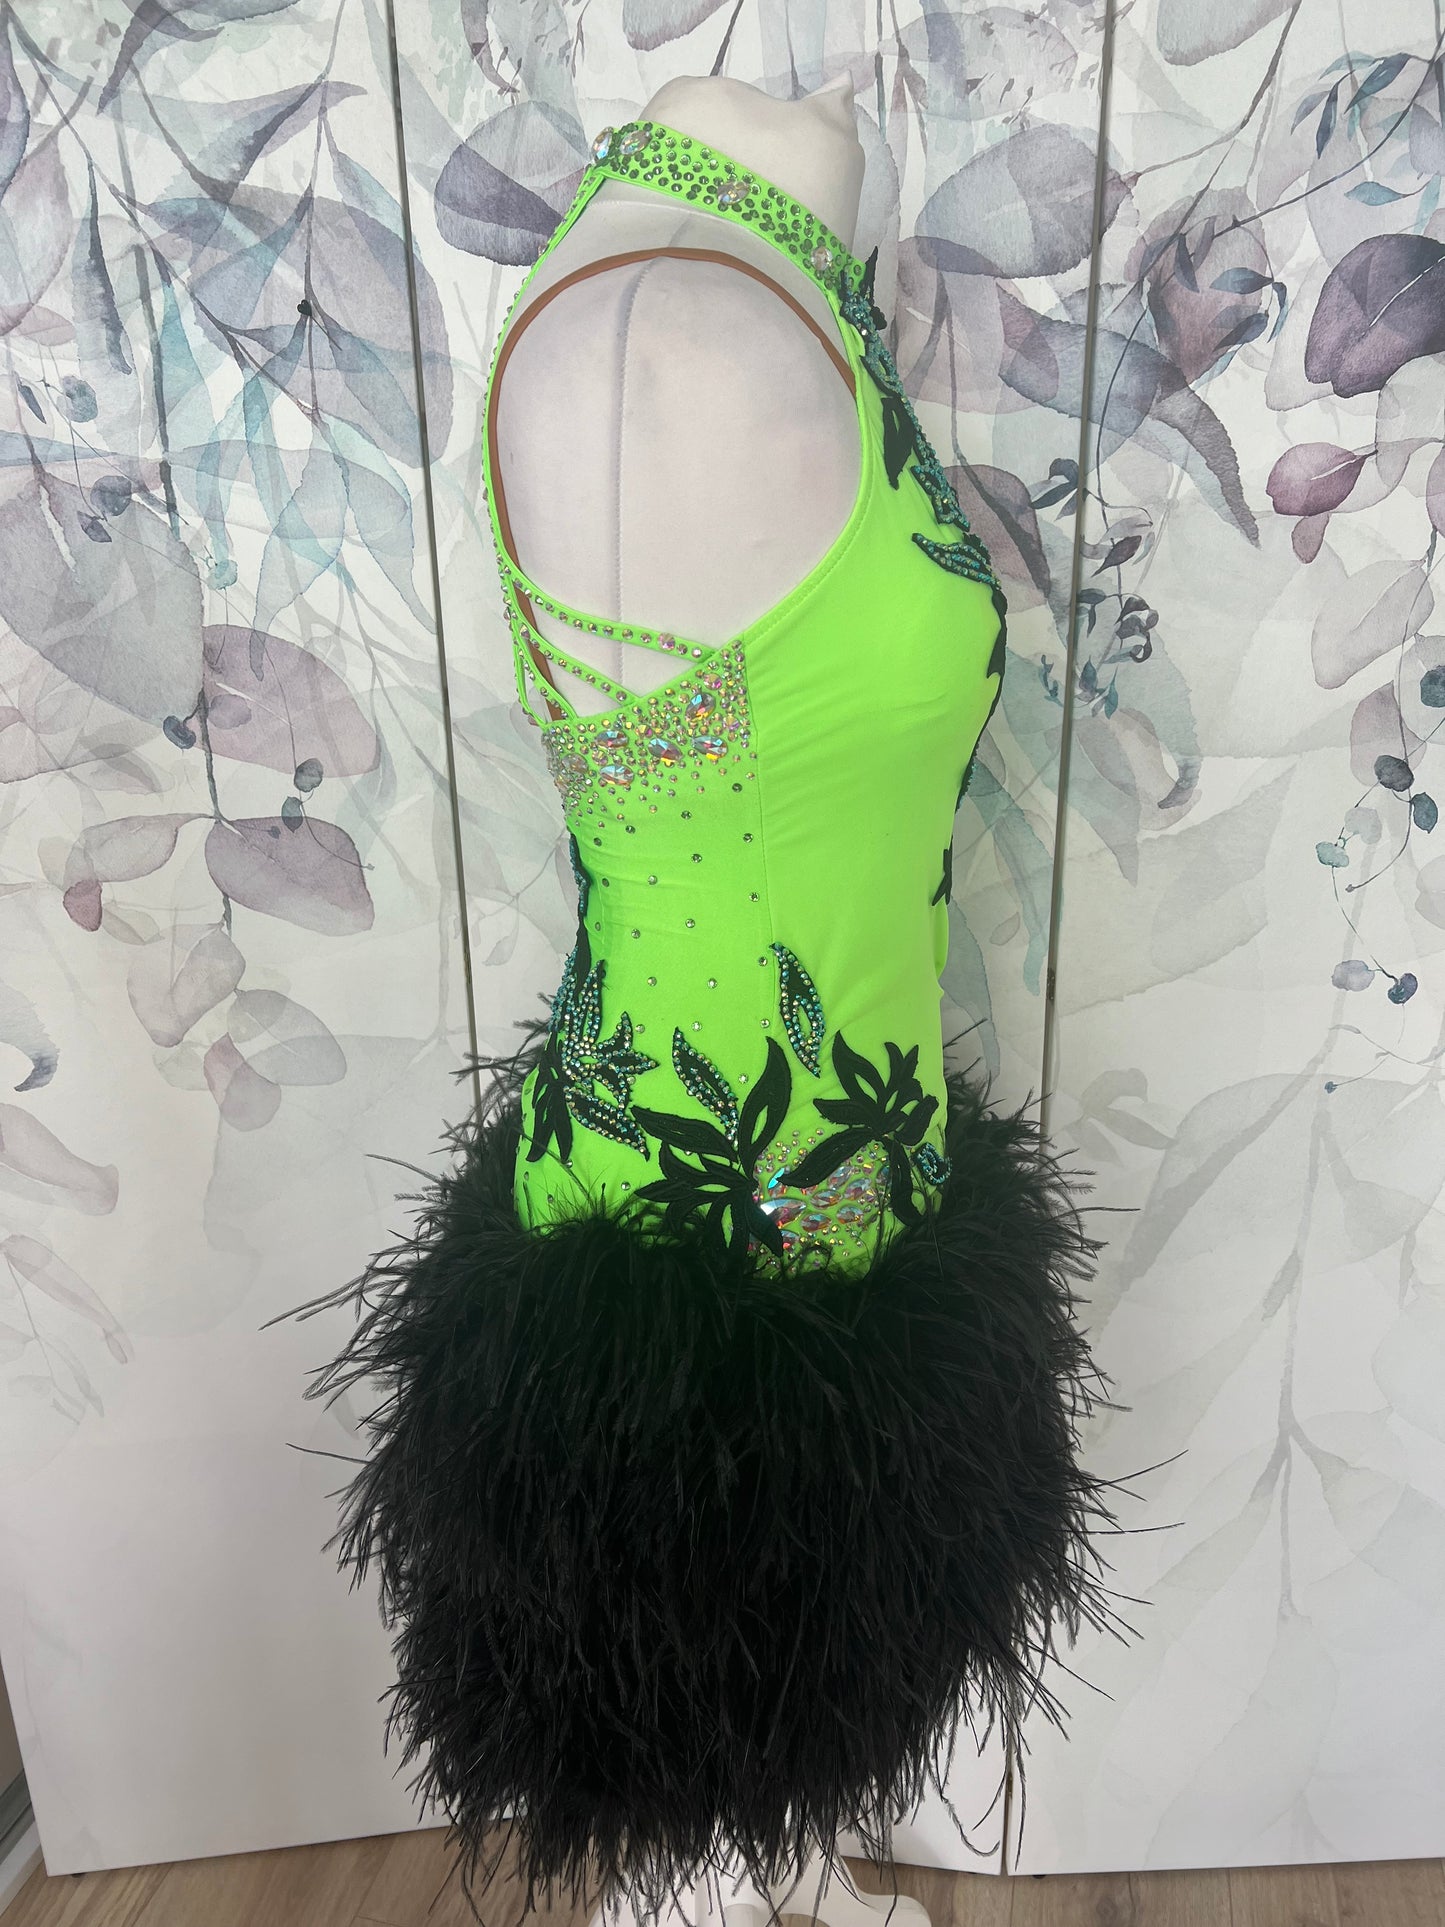 343 Flo Green & Black Latin Dress with keyhole halter neck detail. Strapping design to the back. Full ostrich feather skirt. Decorated with black motifs & stoned in Het AB & AB